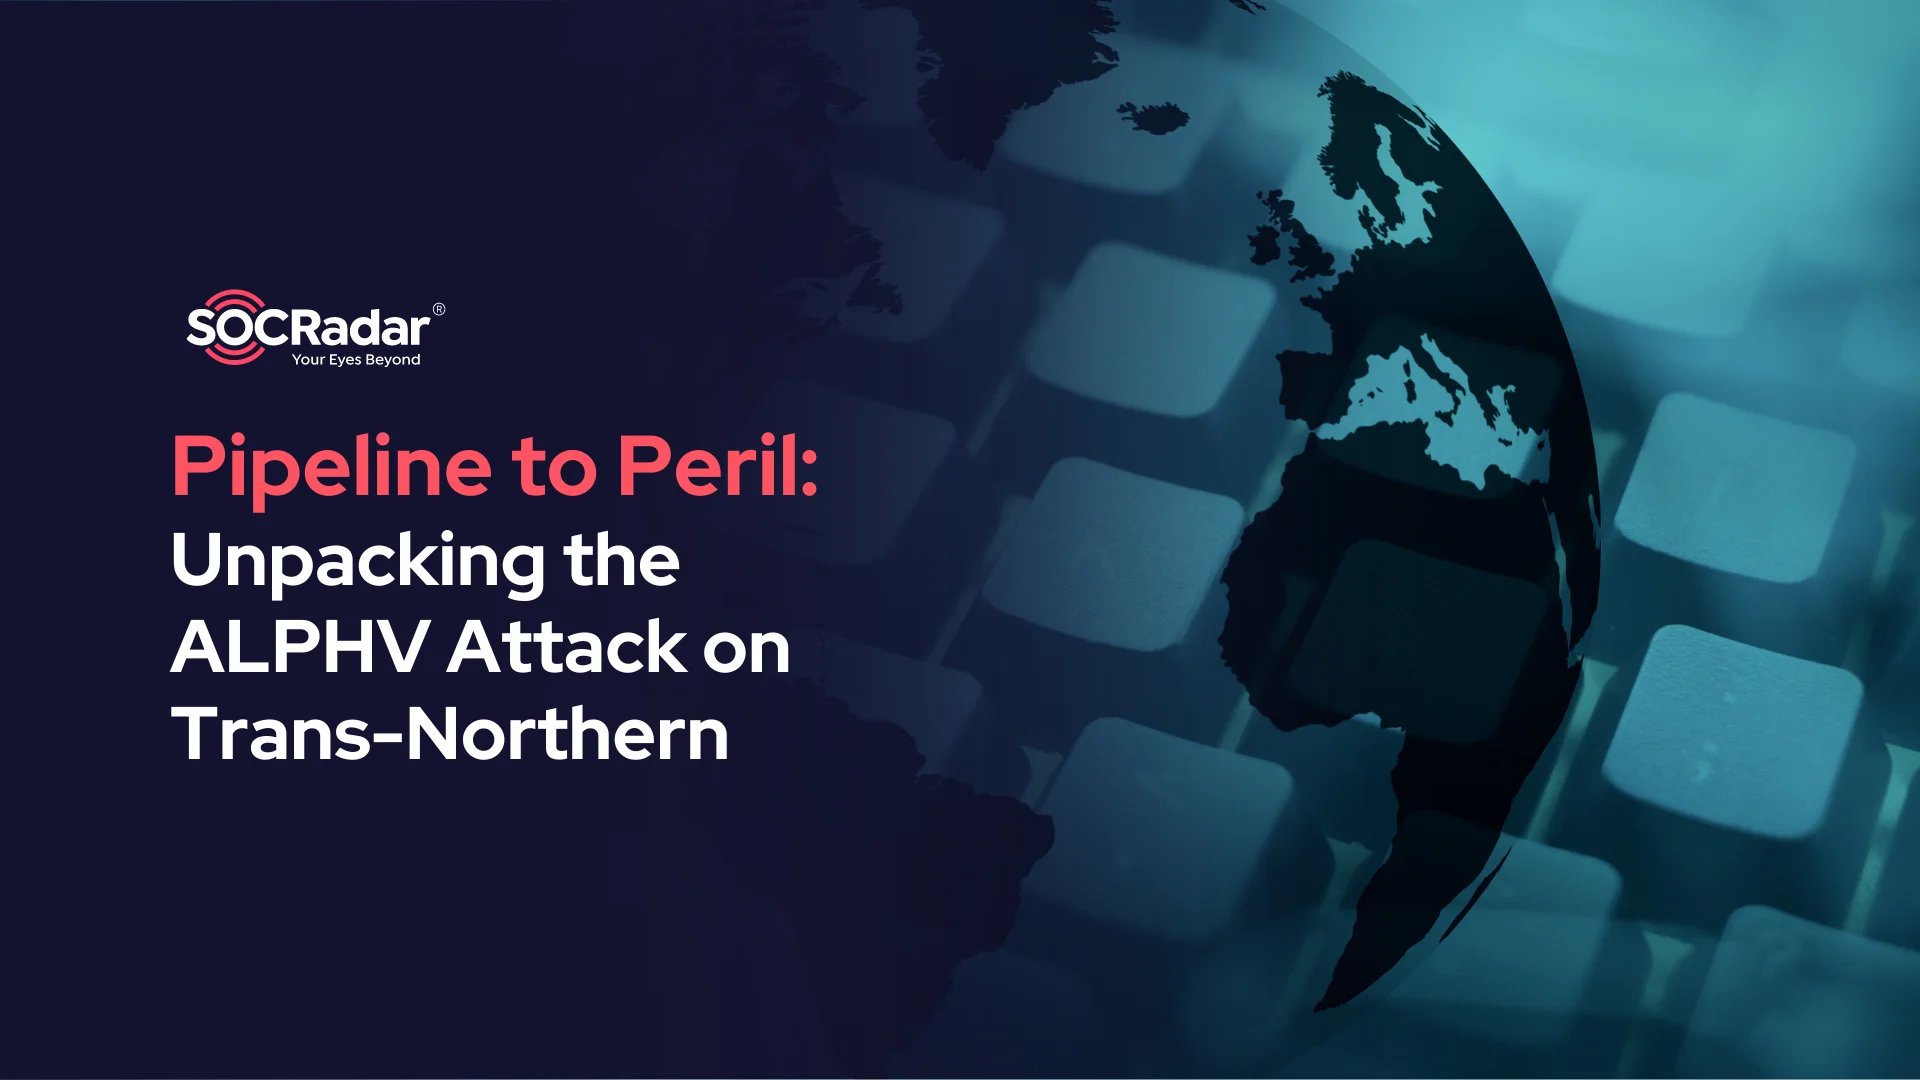 SOCRadar® Cyber Intelligence Inc. | Pipeline to Peril: Unpacking the ALPHV Attack on Trans-Northern